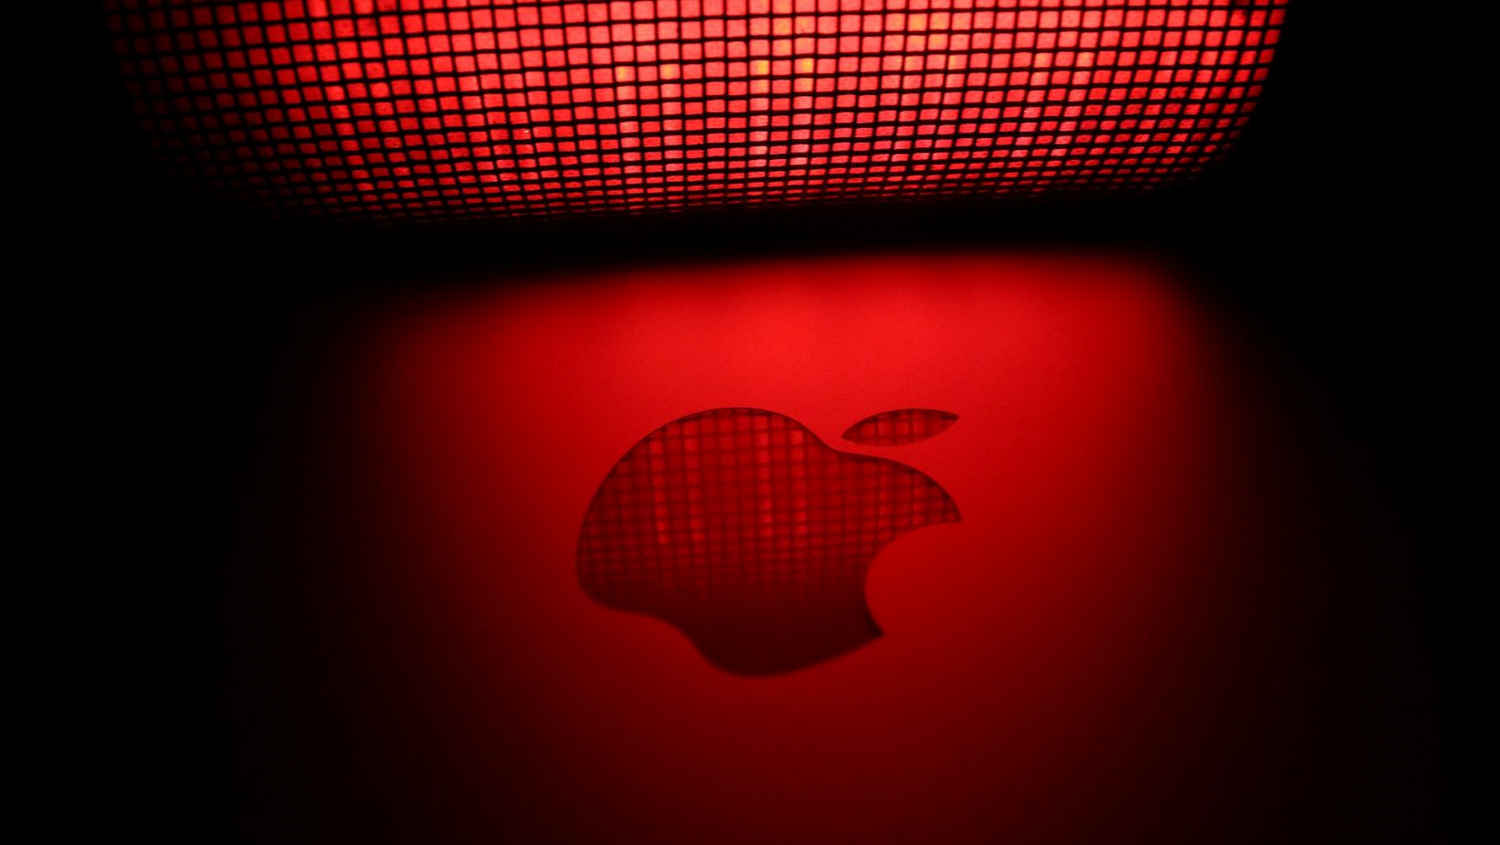 Indian govt wants betting apps removed, Apple says it’s complicated